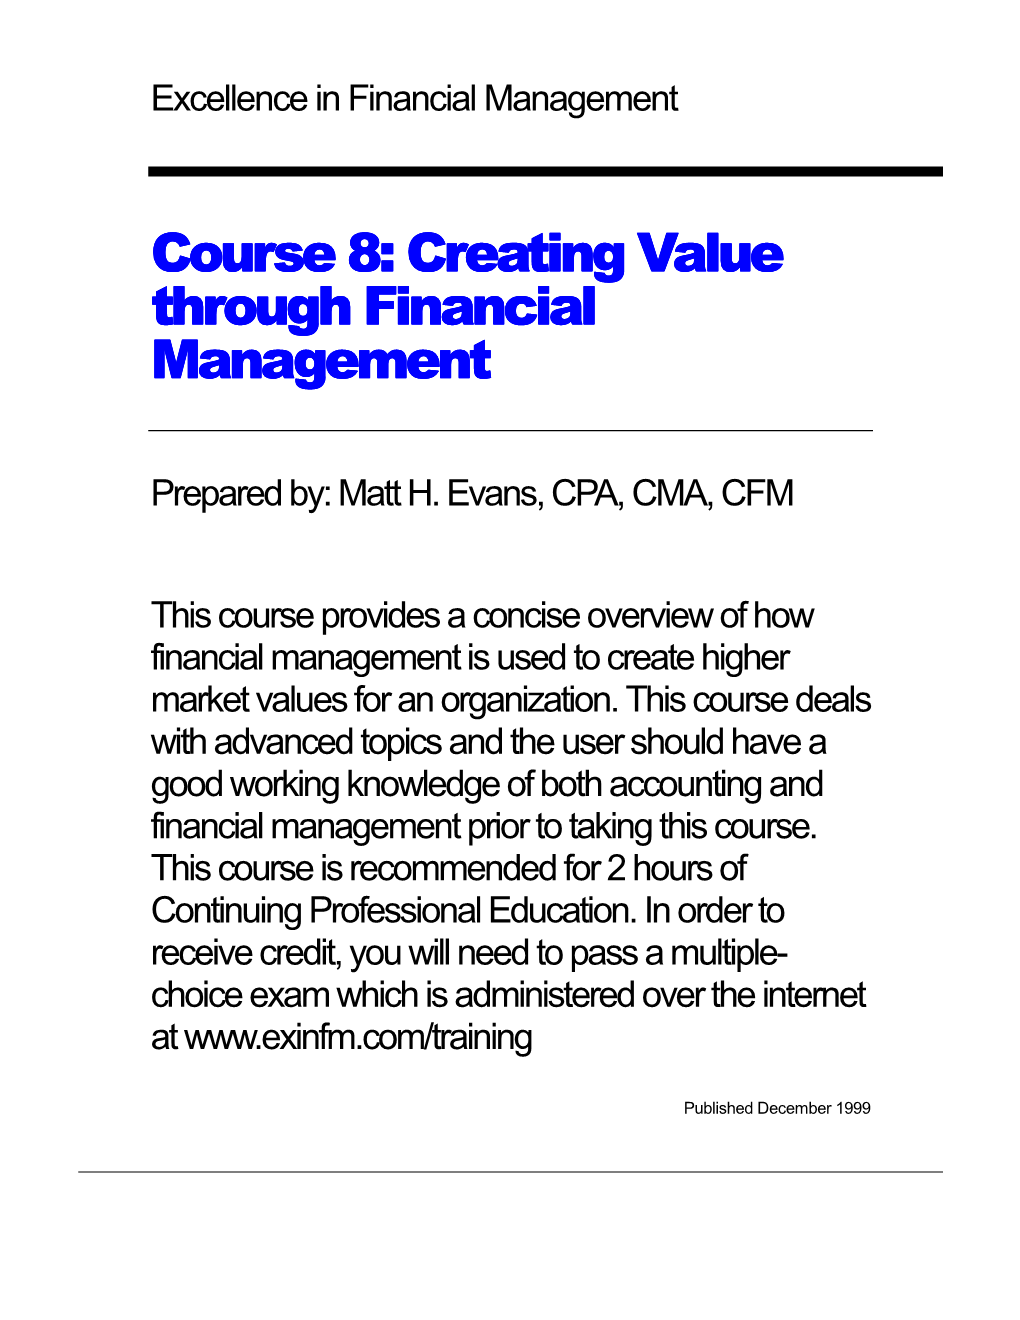 Course 8: Creating Value Through Financial Management